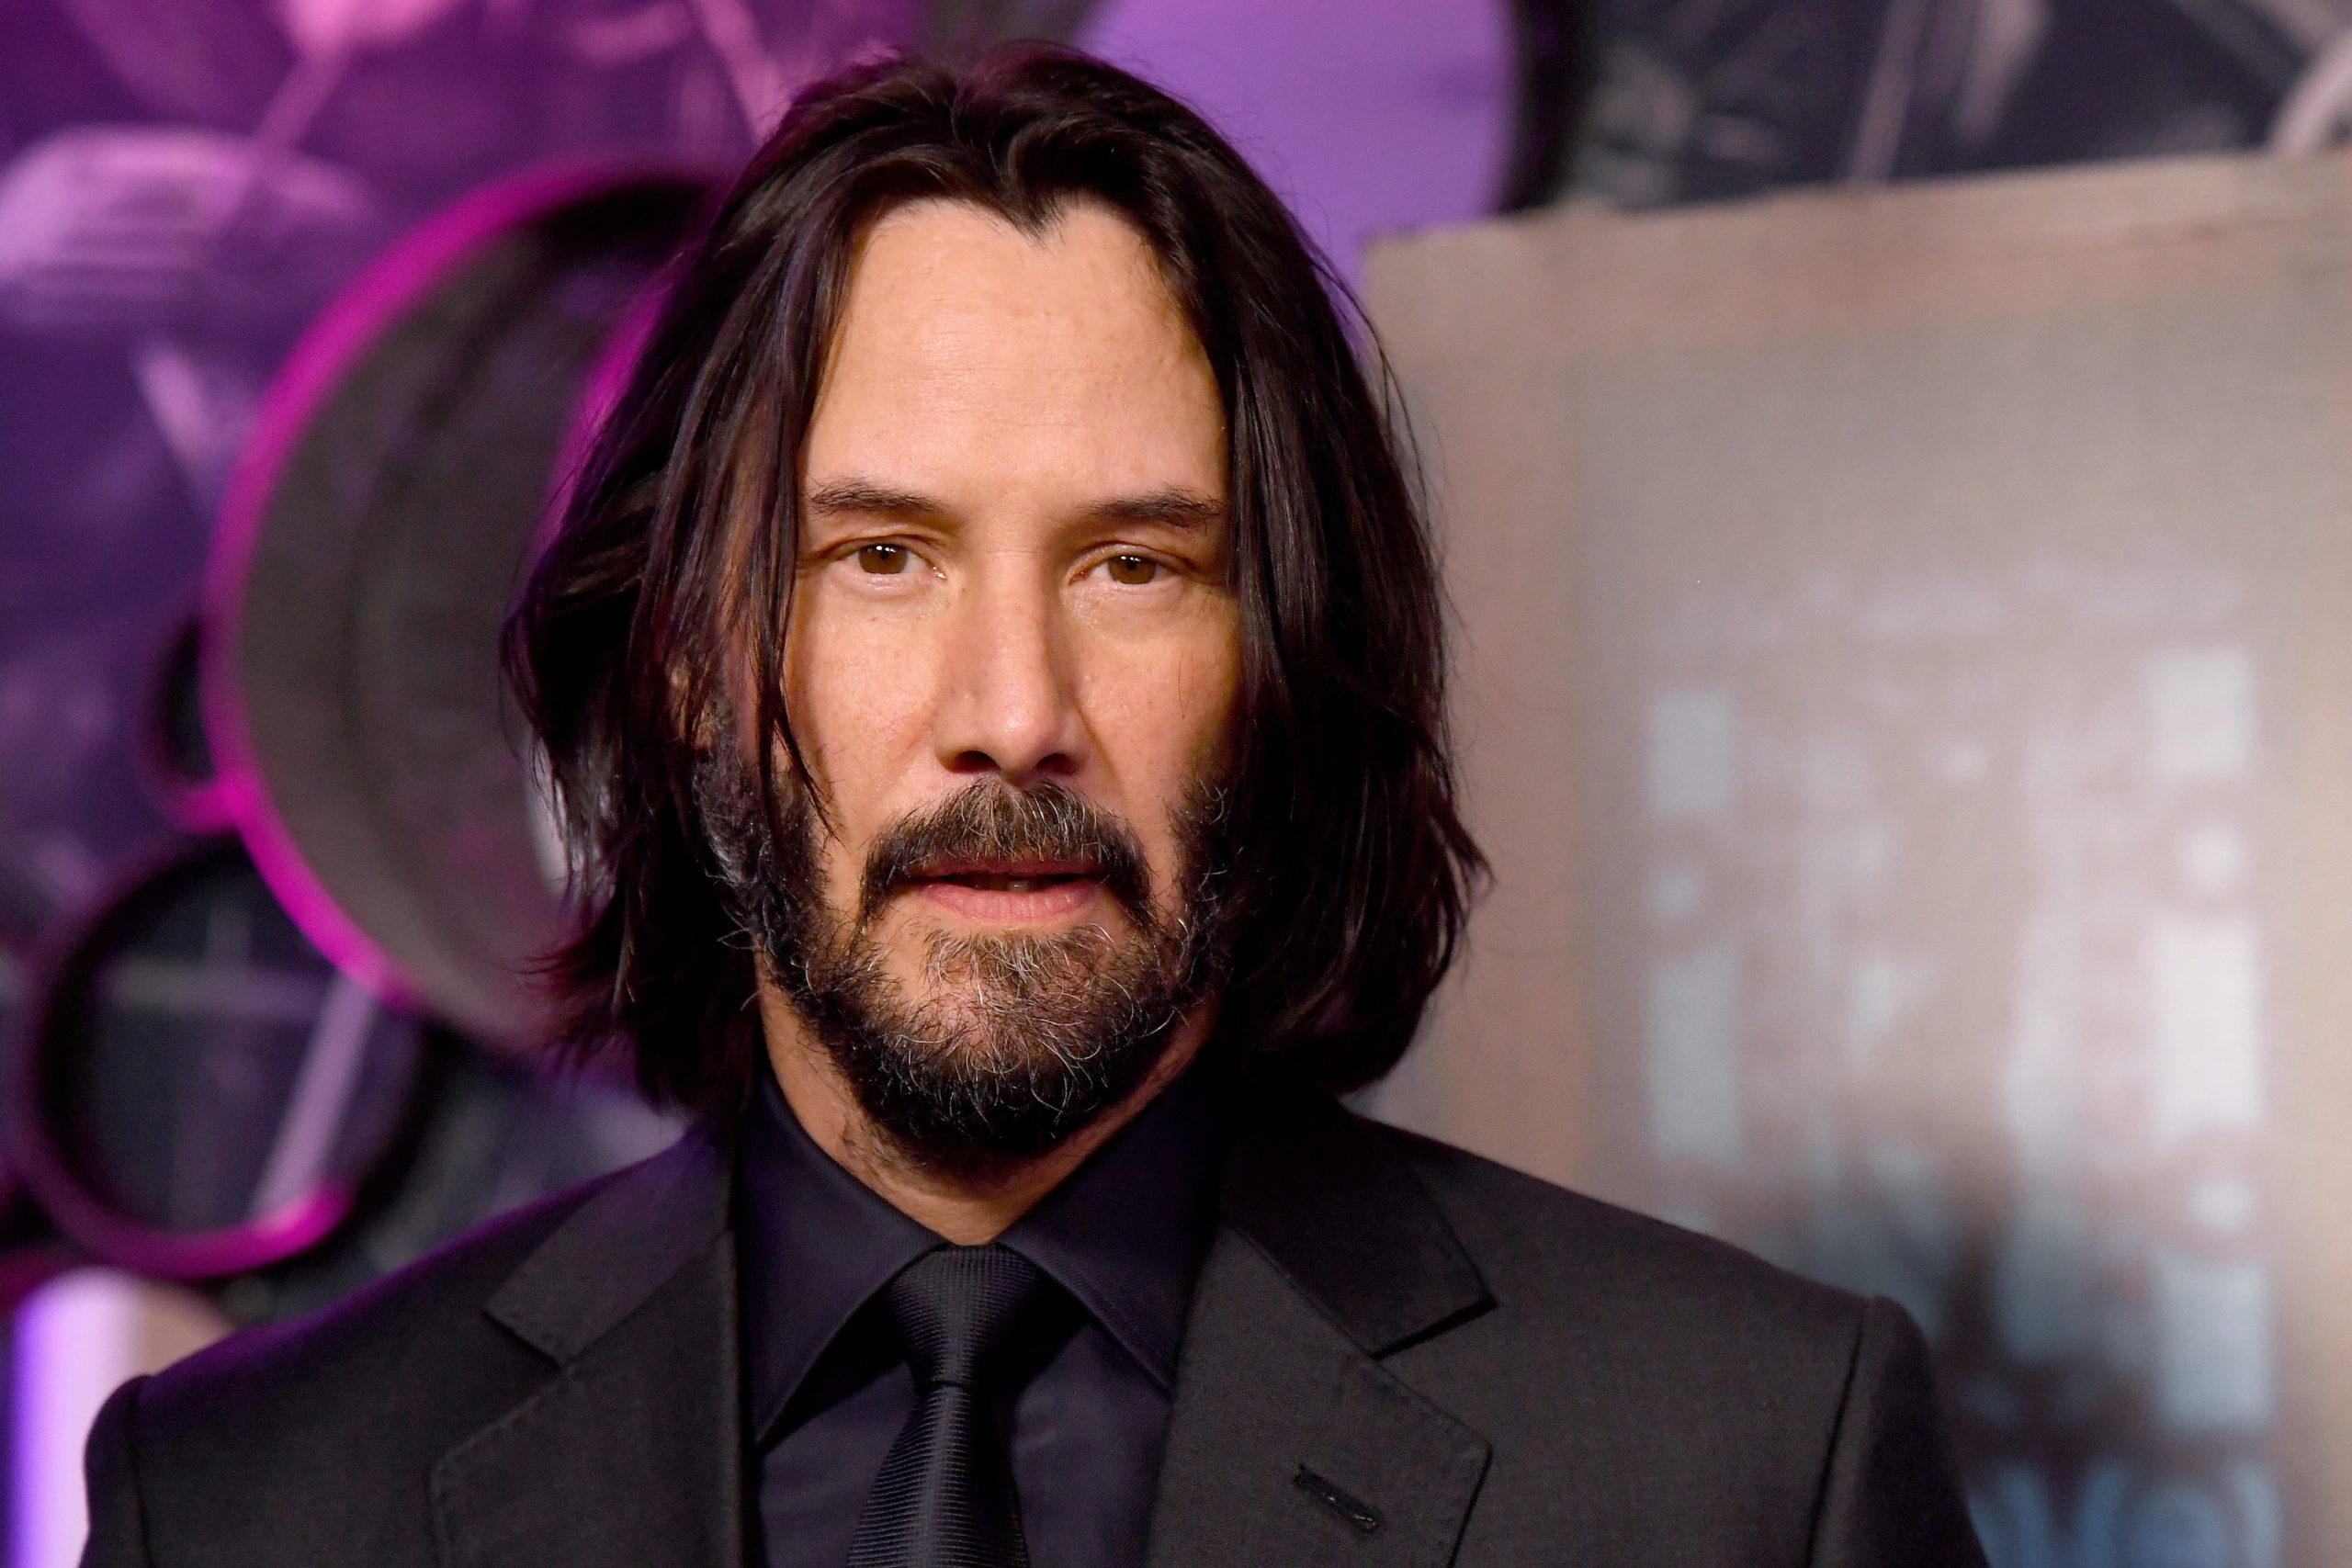 Can you believe the John Wick movies?  Then you will like this place too!